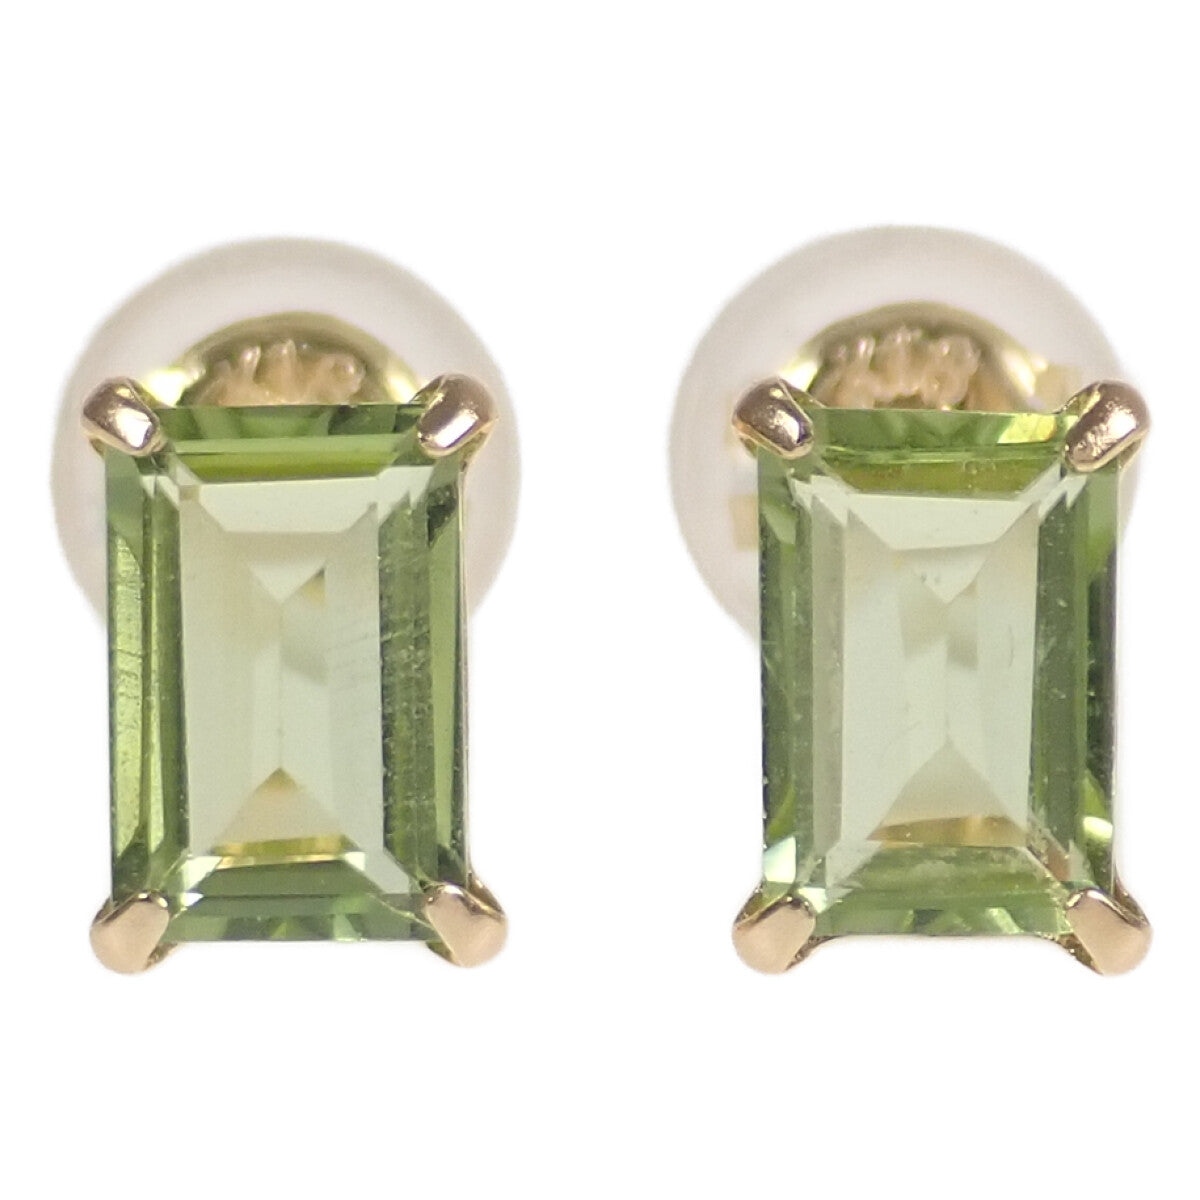 [LuxUness]  K18 Yellow Gold & Peridot Square Design Earrings, Green for Women - New & Unused in Brand new